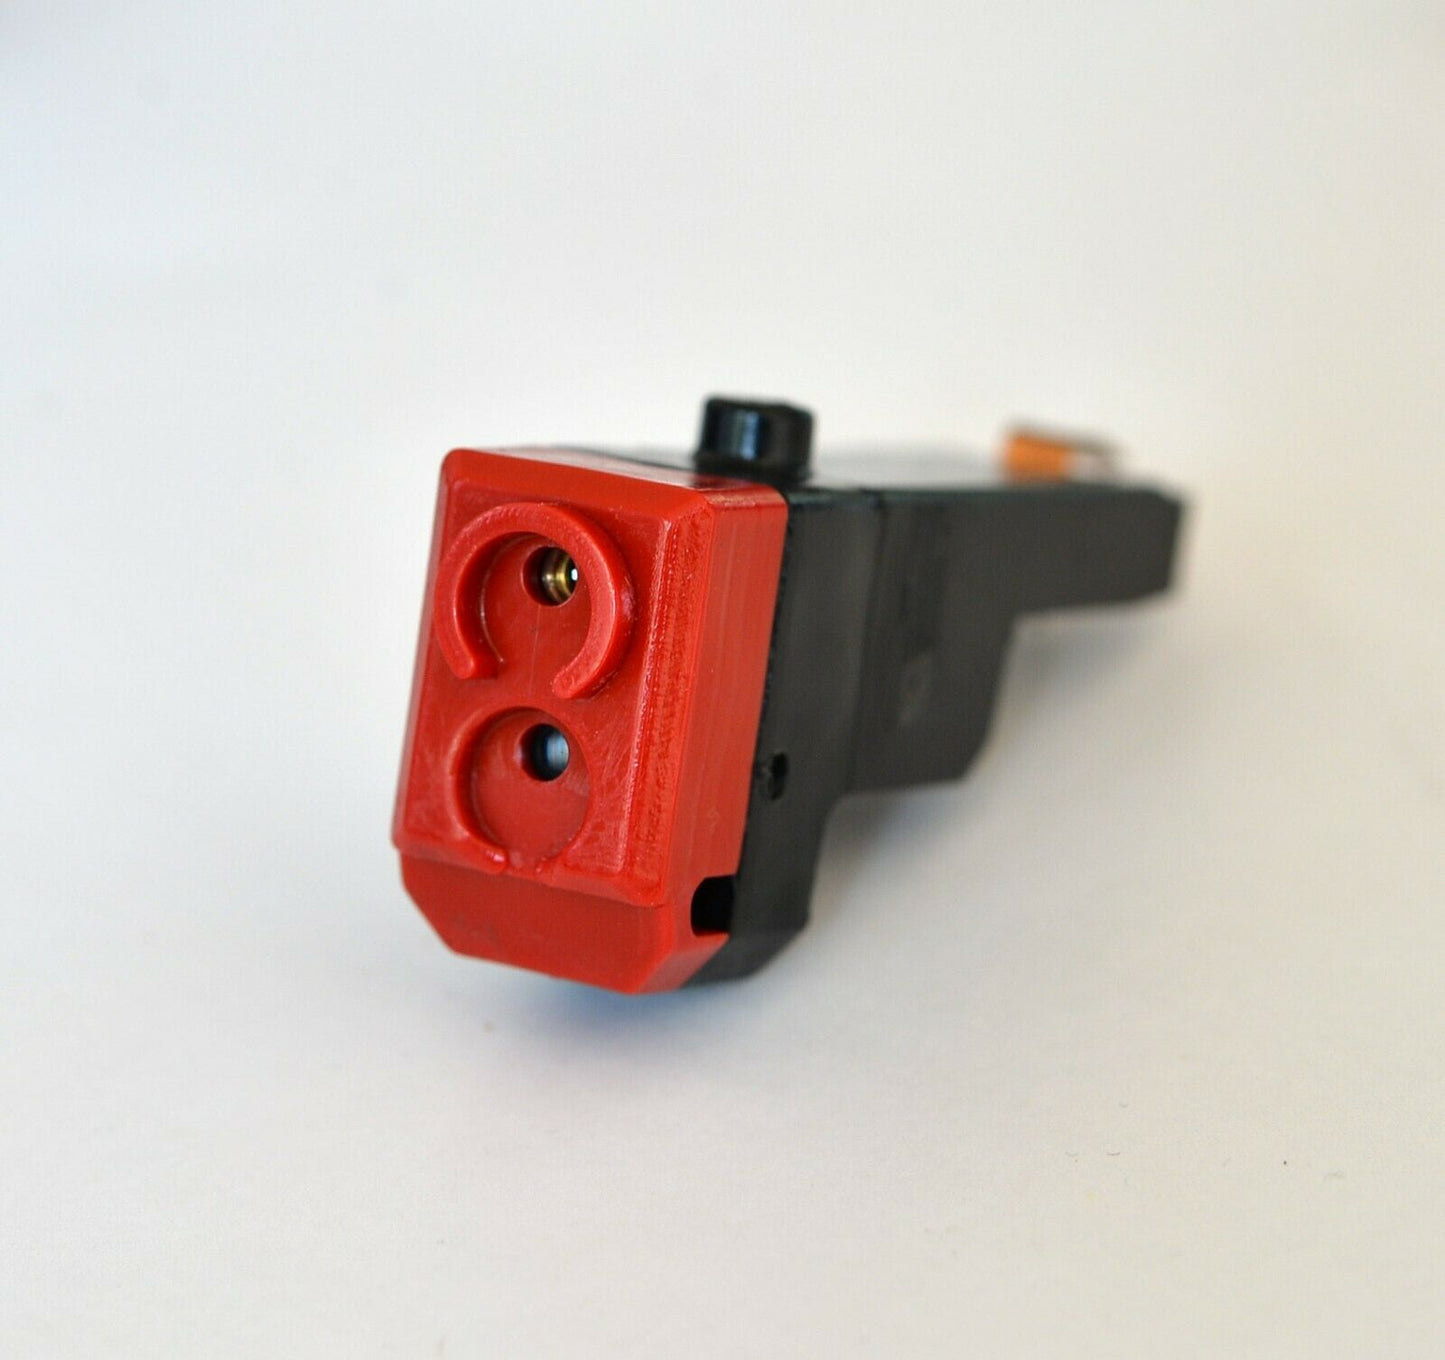 Invisible Laser Module for SIRT 110 Training Pistol